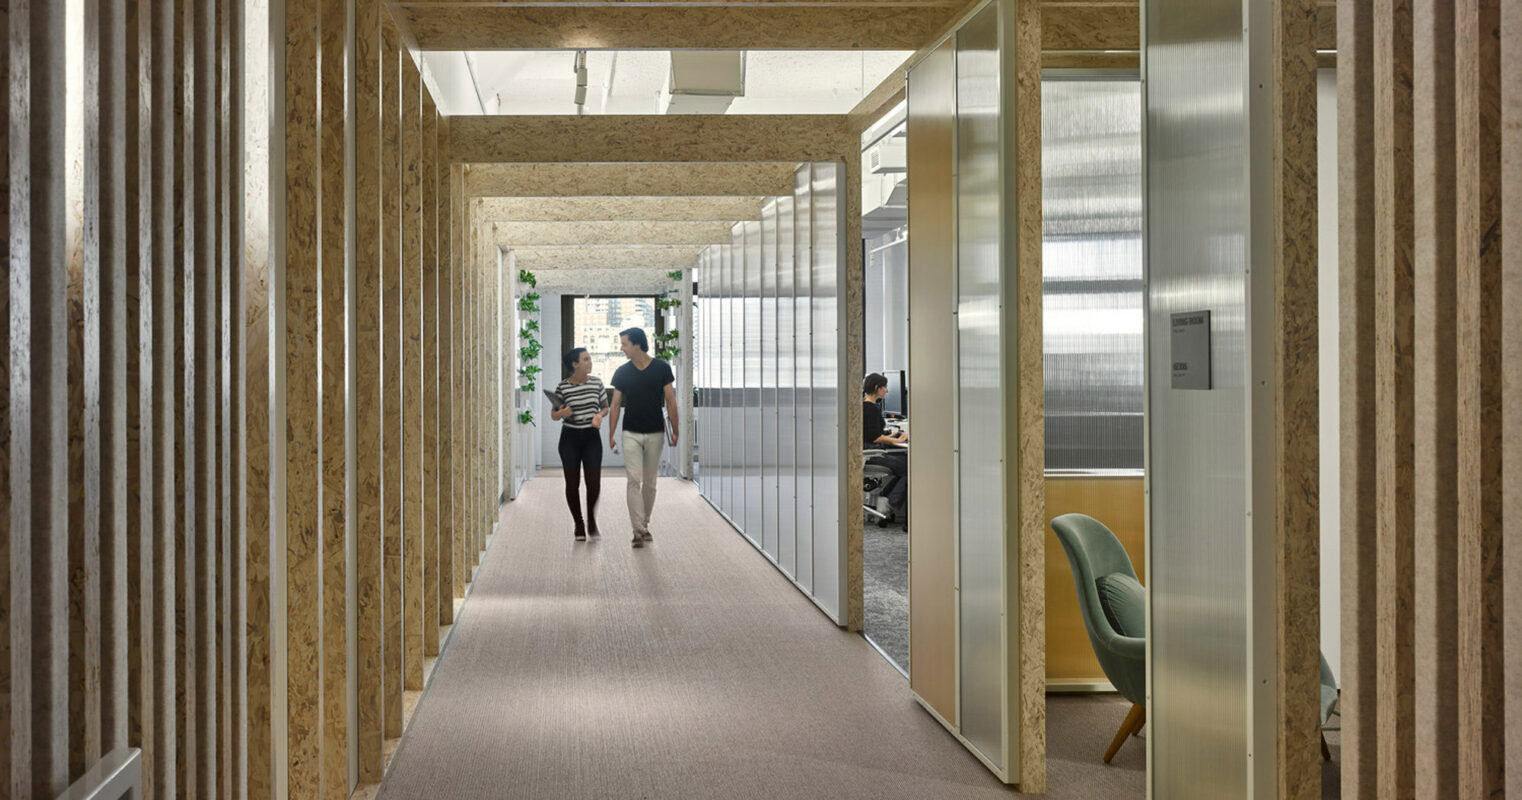 Narrow hallway in a modern office, lined with translucent glass and natural plywood walls, featuring a carpeted floor that leads towards a person in the distance. The space emphasizes natural light and transparency, fostering an open and airy work environment.